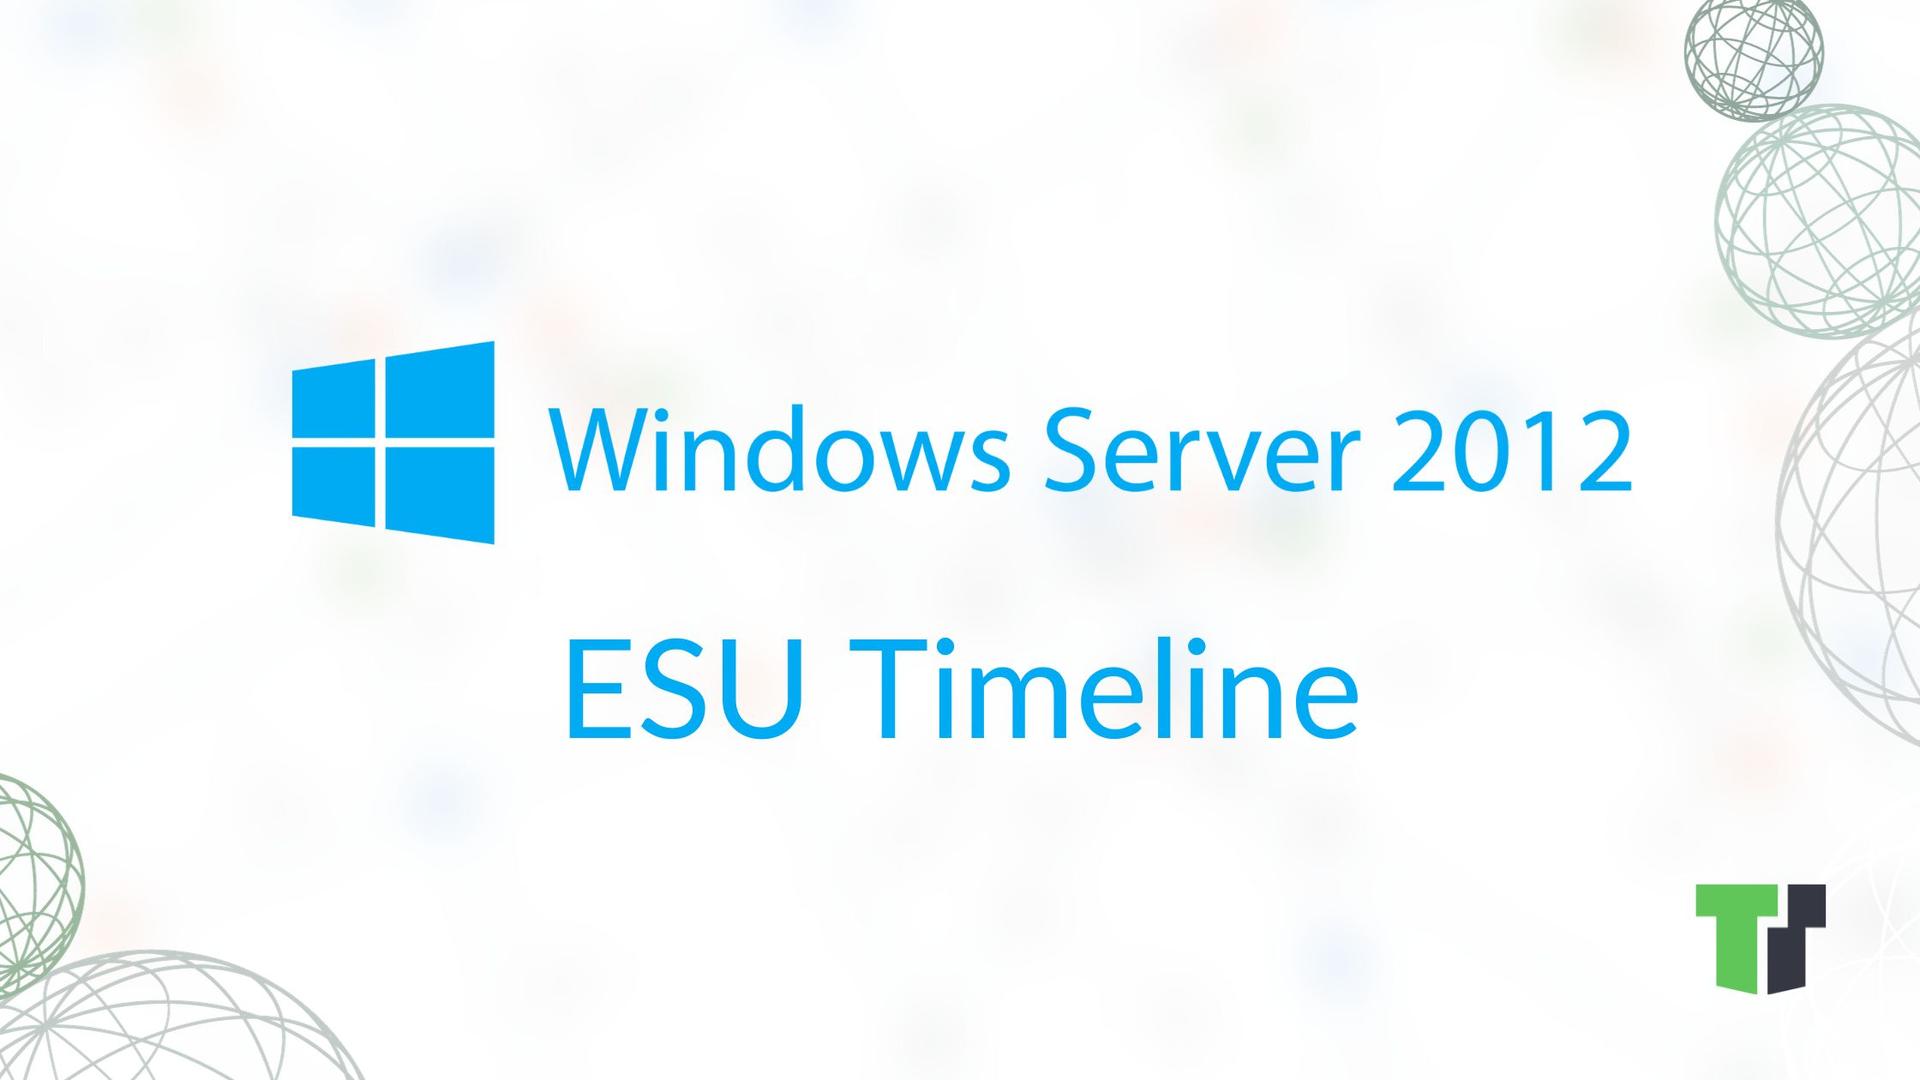 Three More Years of Windows Server 2012 Extended Security Updates